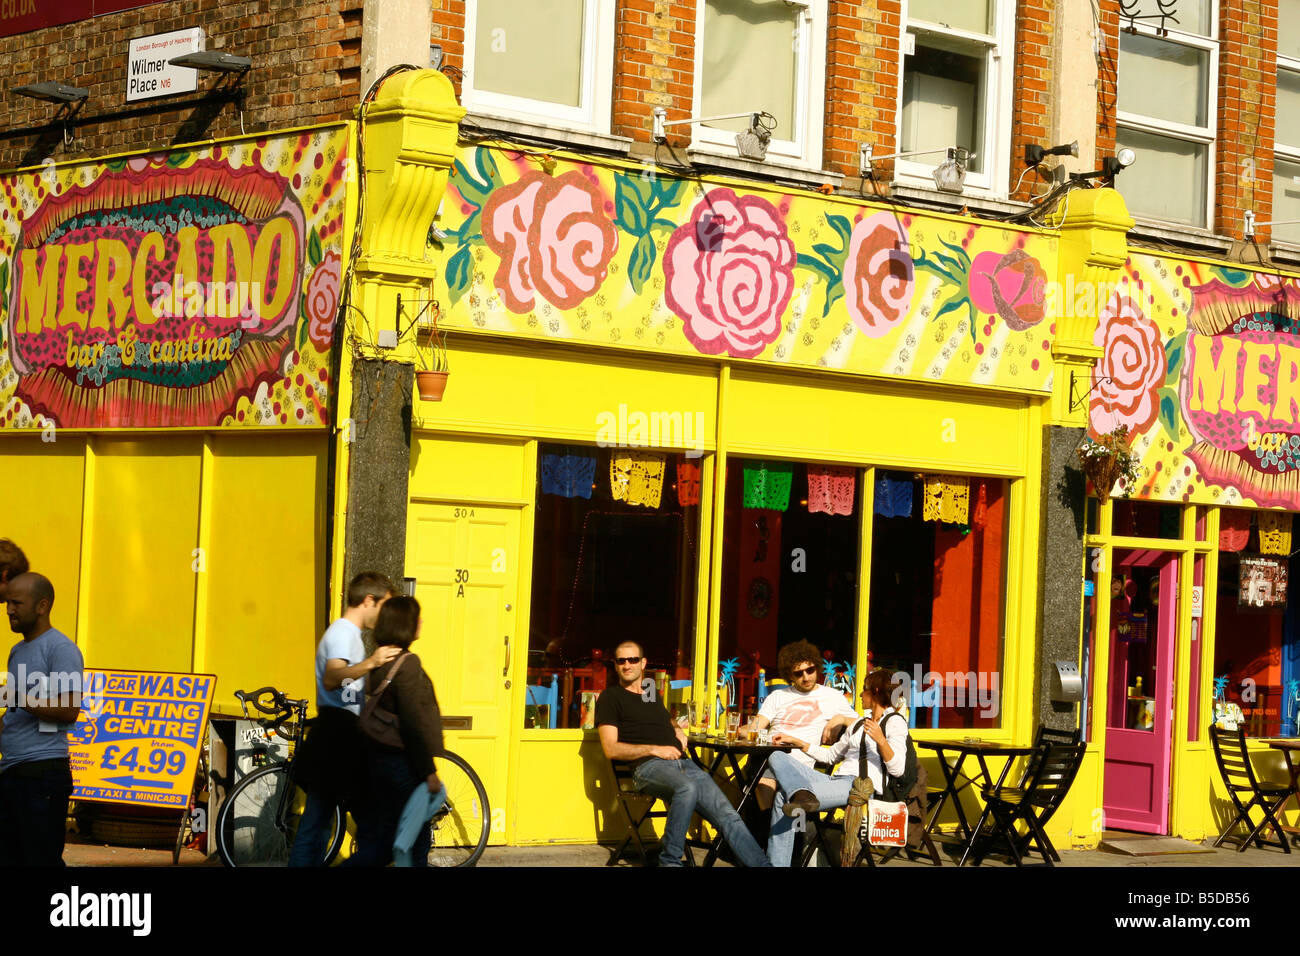 People sitting at a table outside a cafe, Hackney, London, England, UK Stock Photo